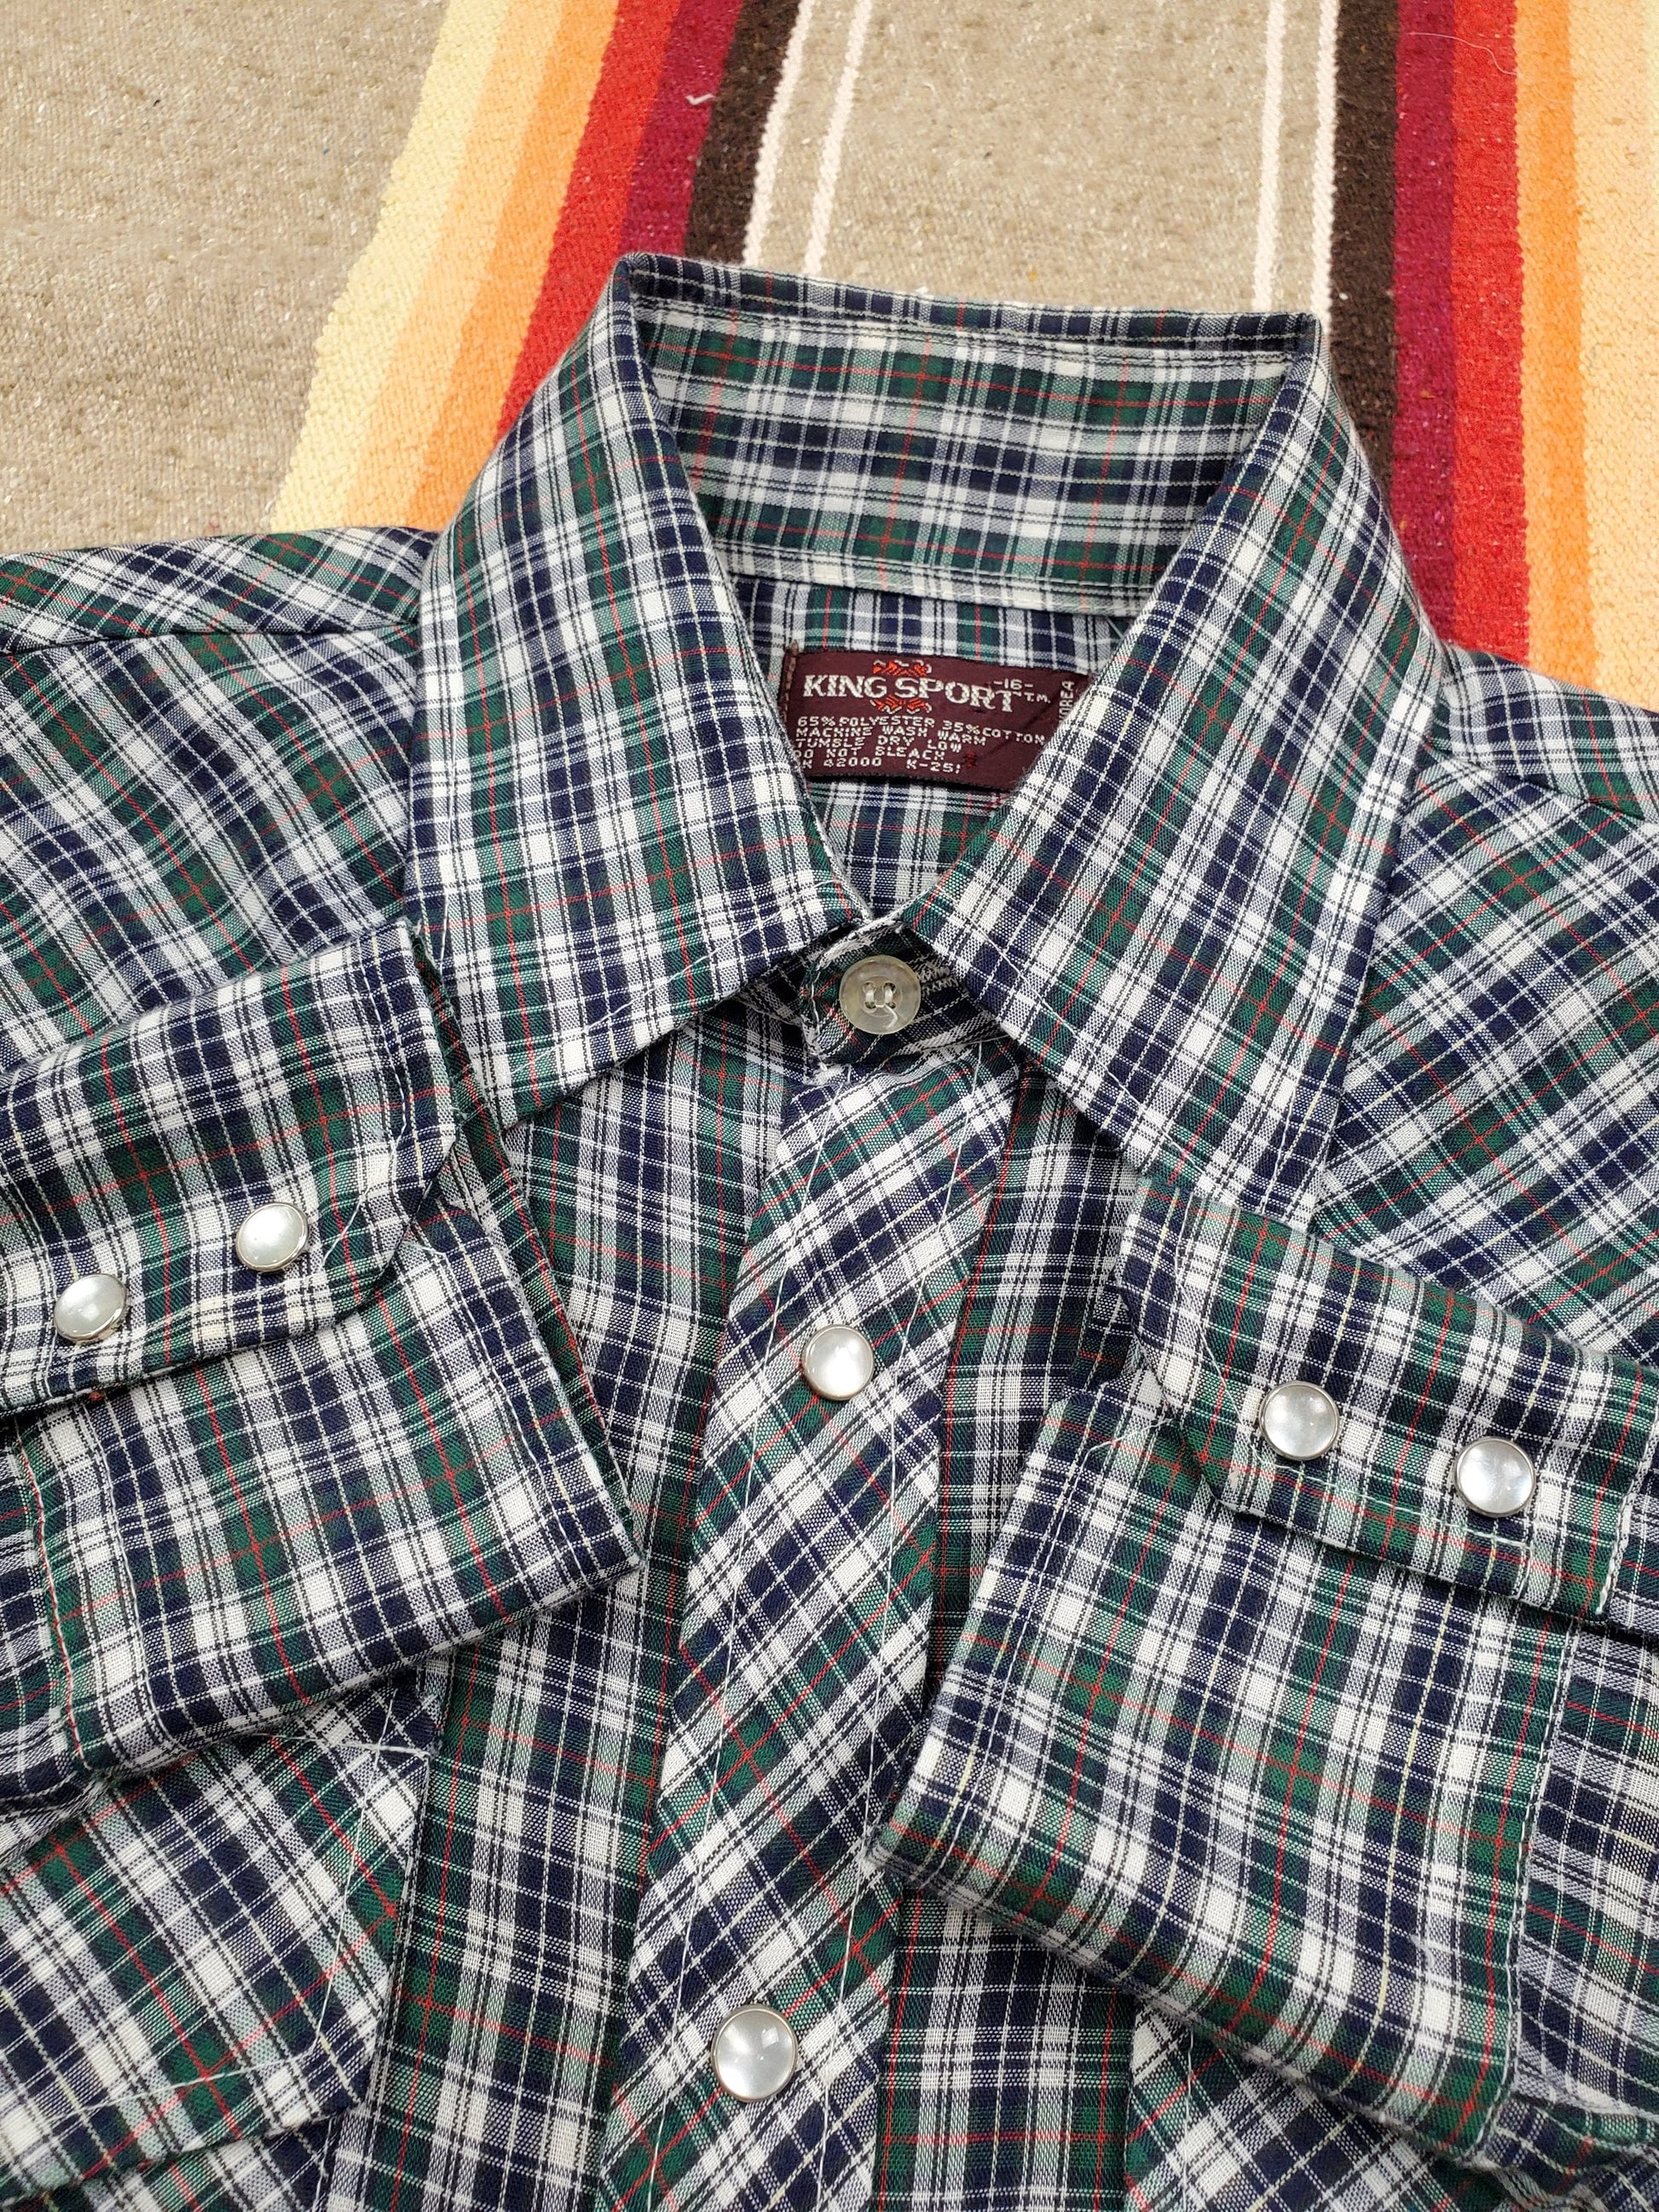 1970s/1980s Kingsport Plaid Western Shirt Size S